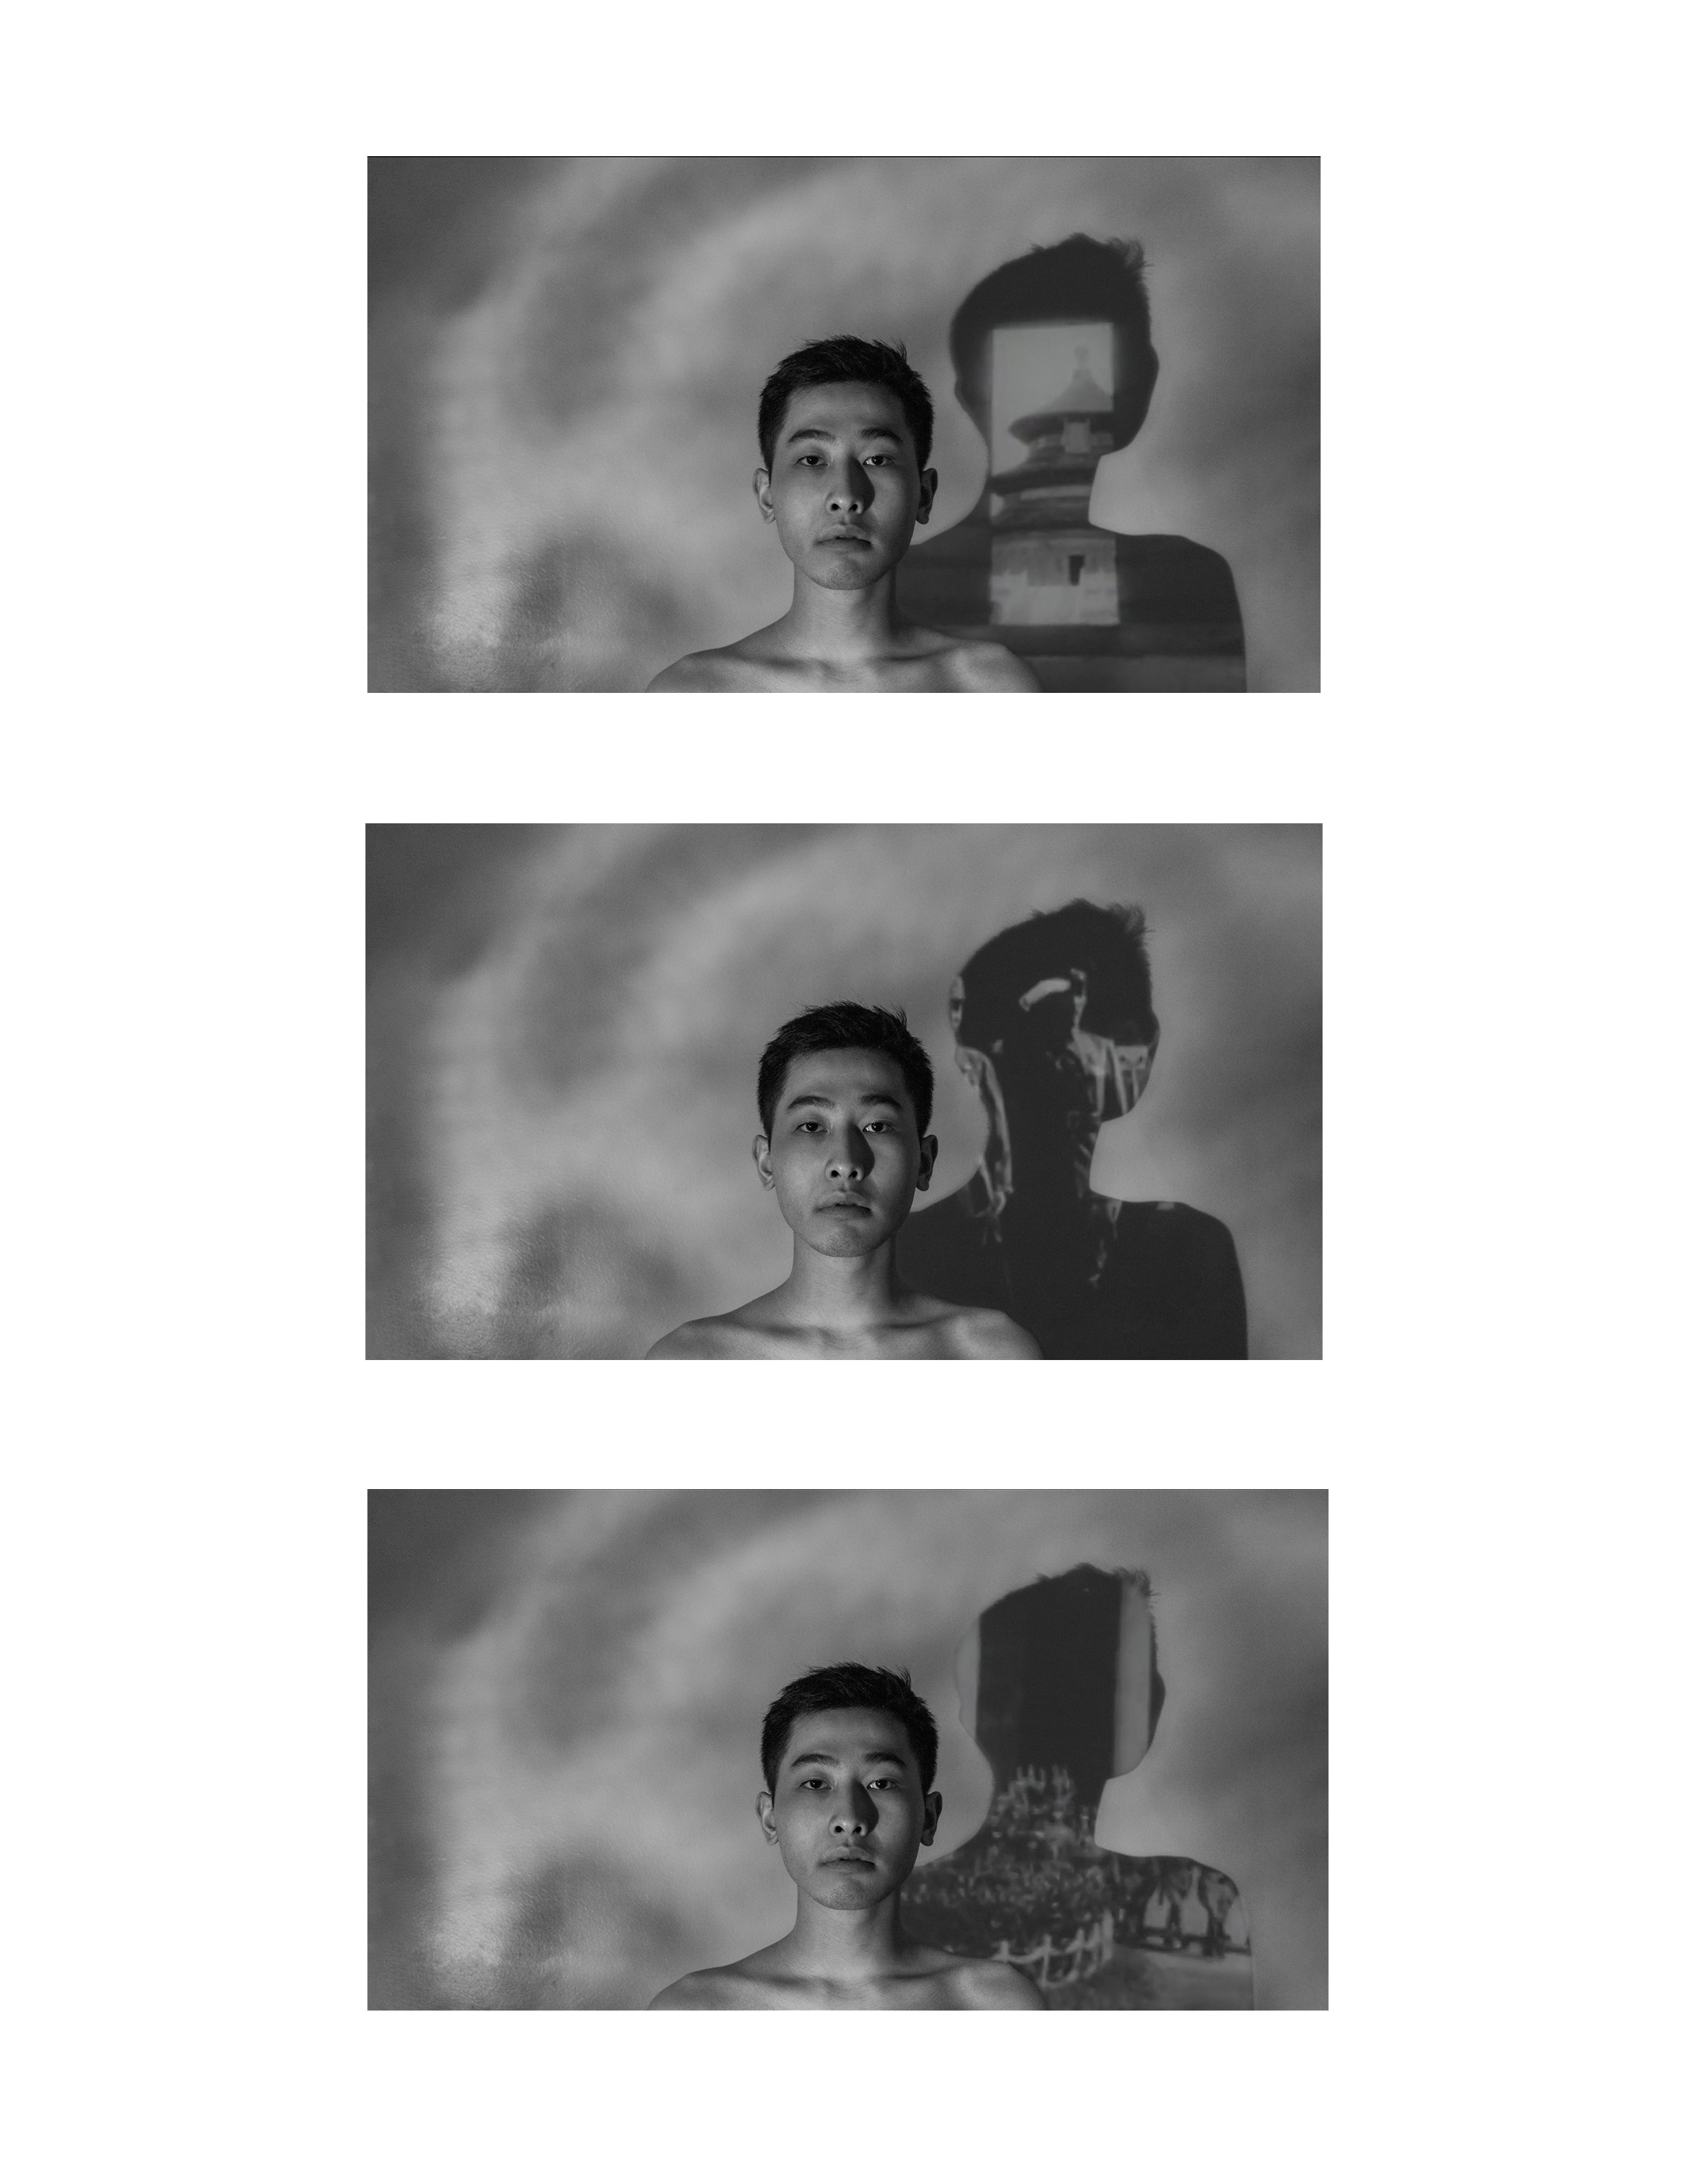  Three still captures from a black and white video with an Asian male at center and film playing in shadow of figure.